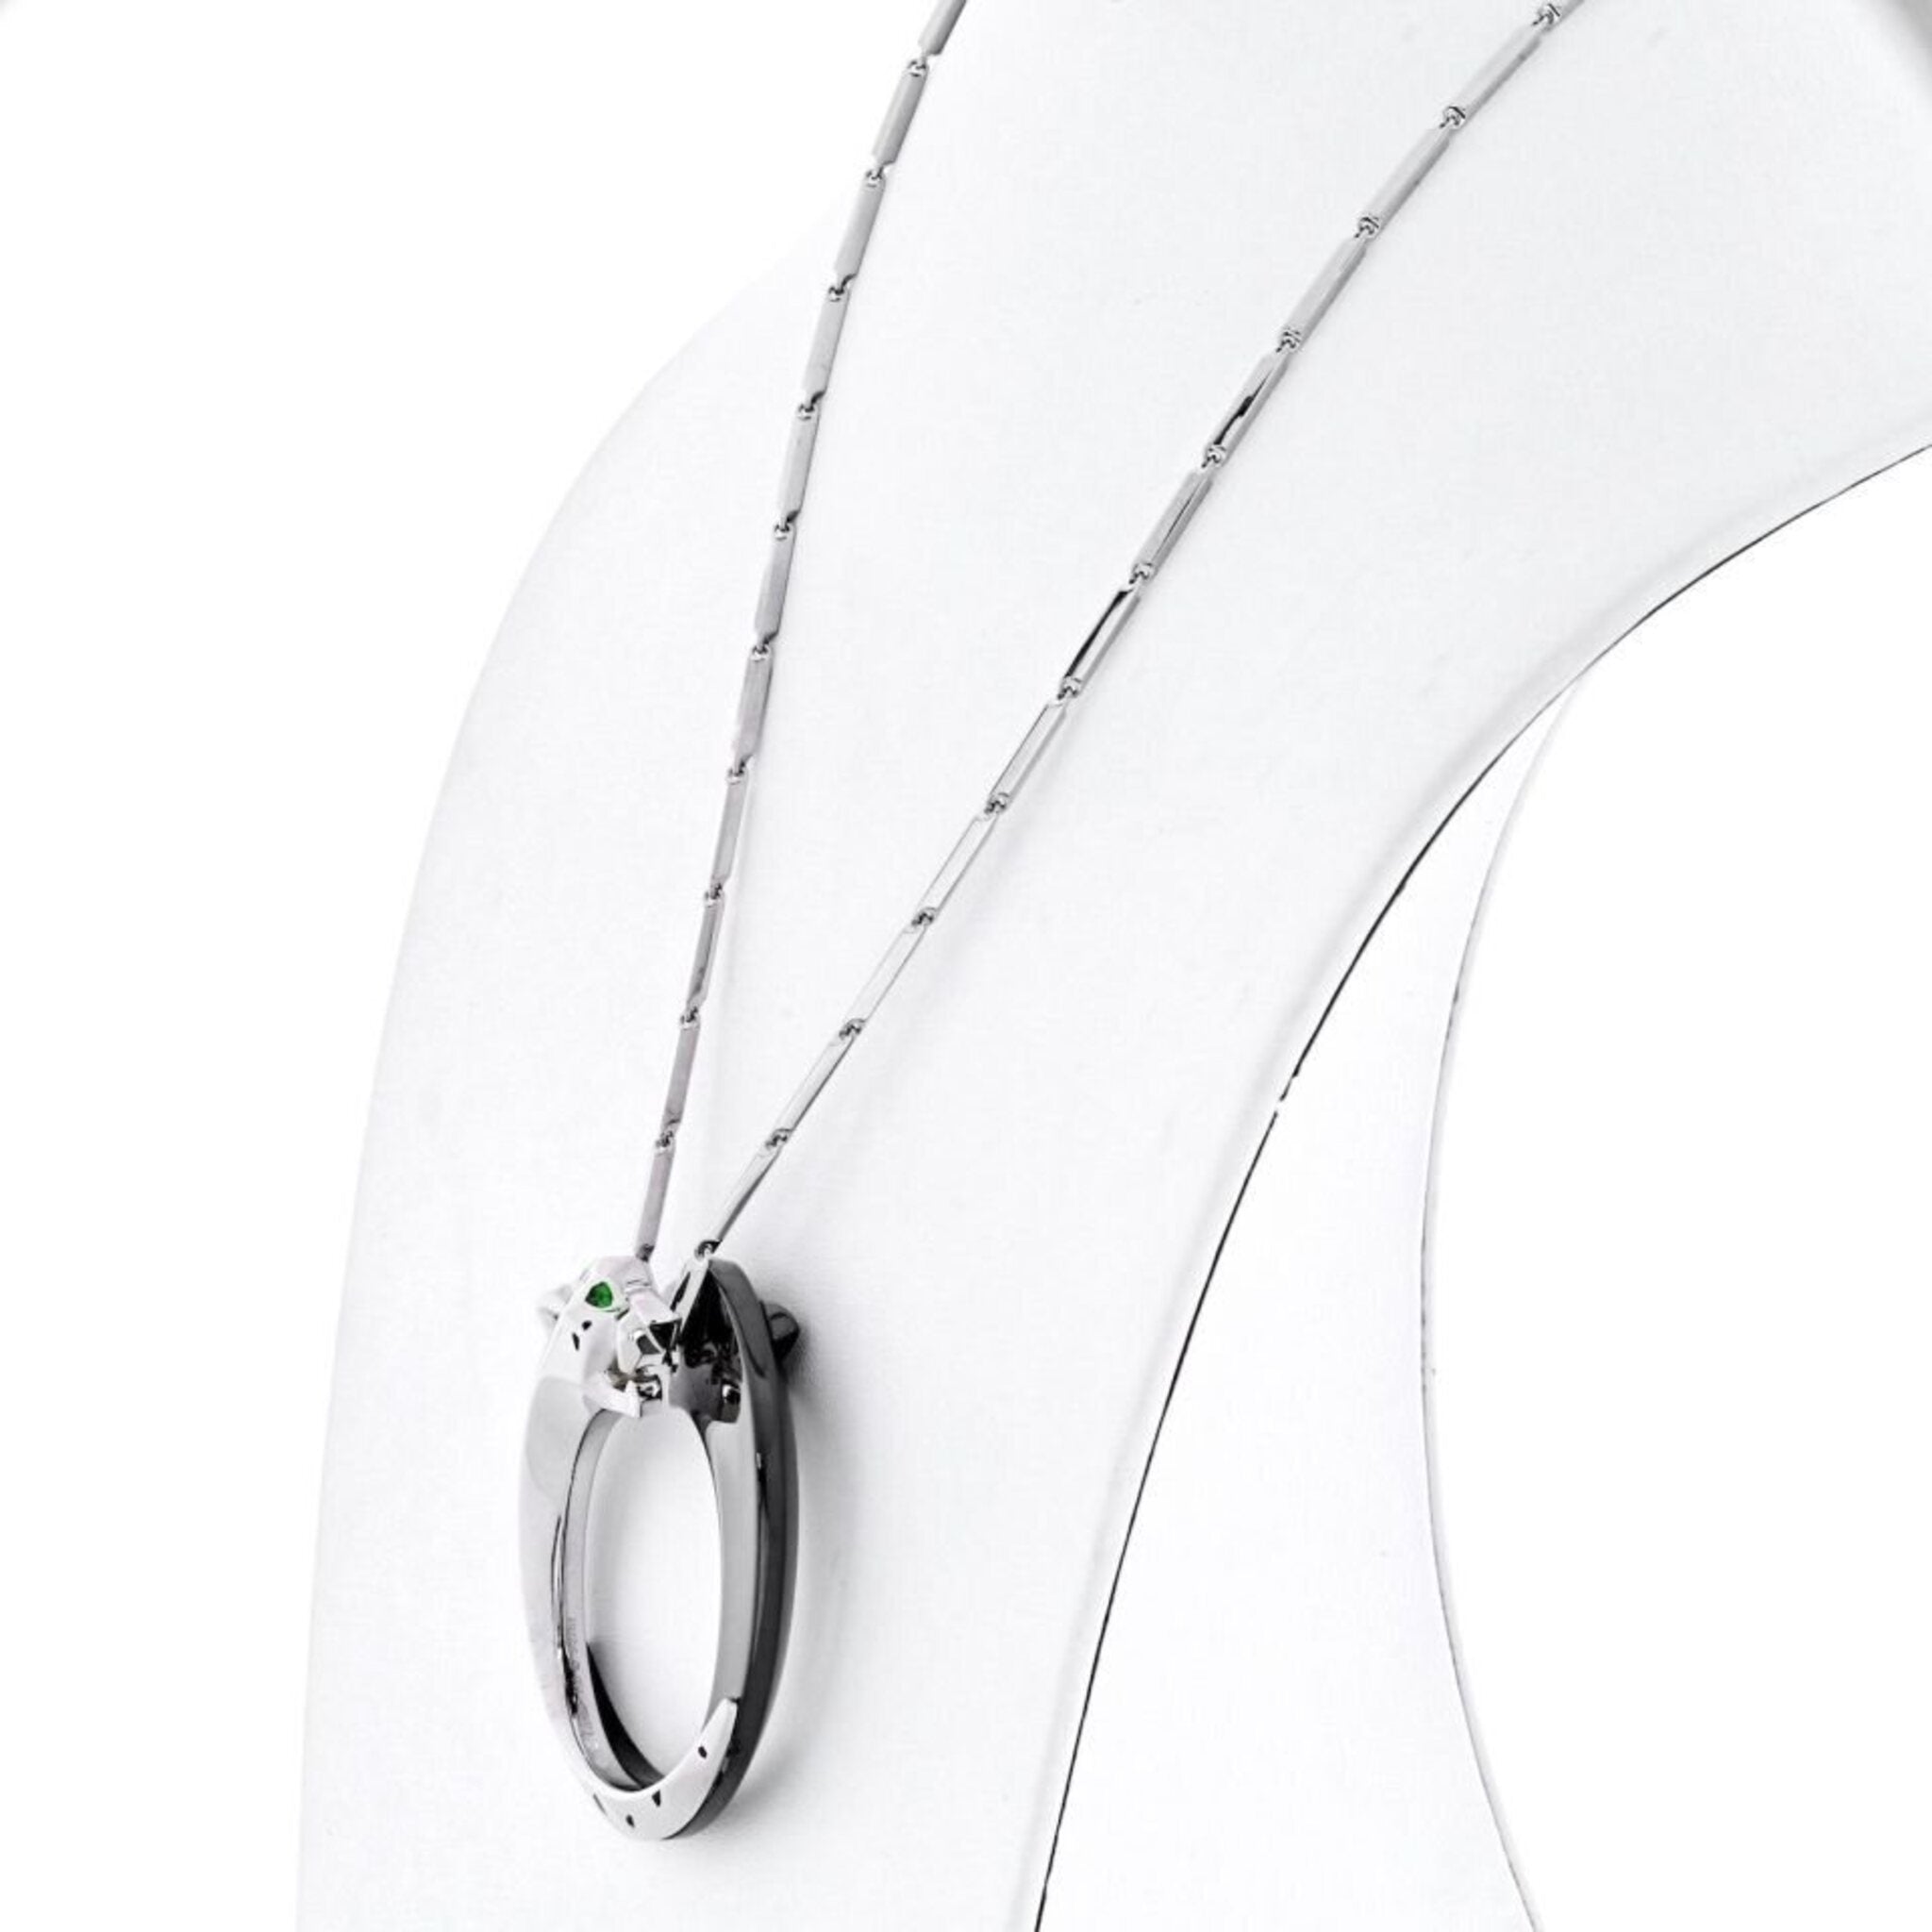 Cartier - 18K White Gold Ceramic, Black Ceramic, Panthere Necklace